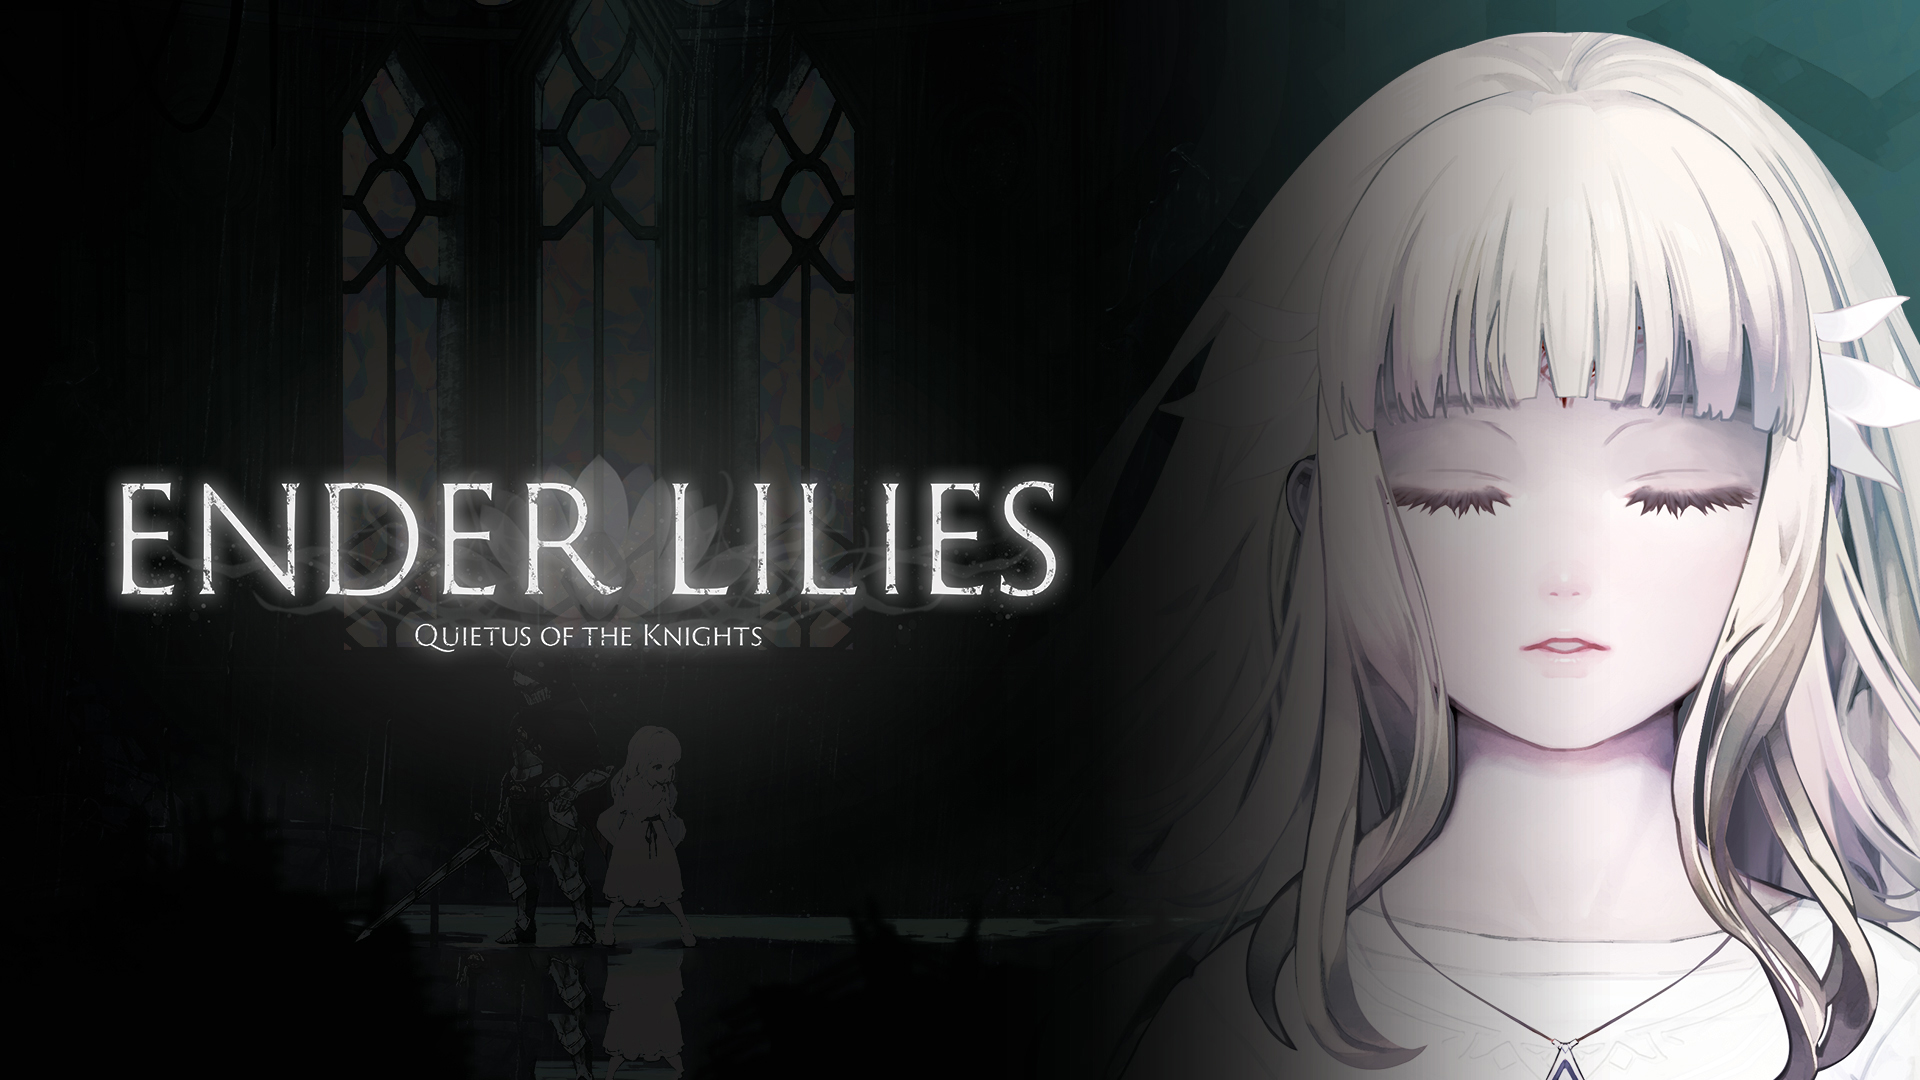 Ender lilies quietus of the knights steam фото 7